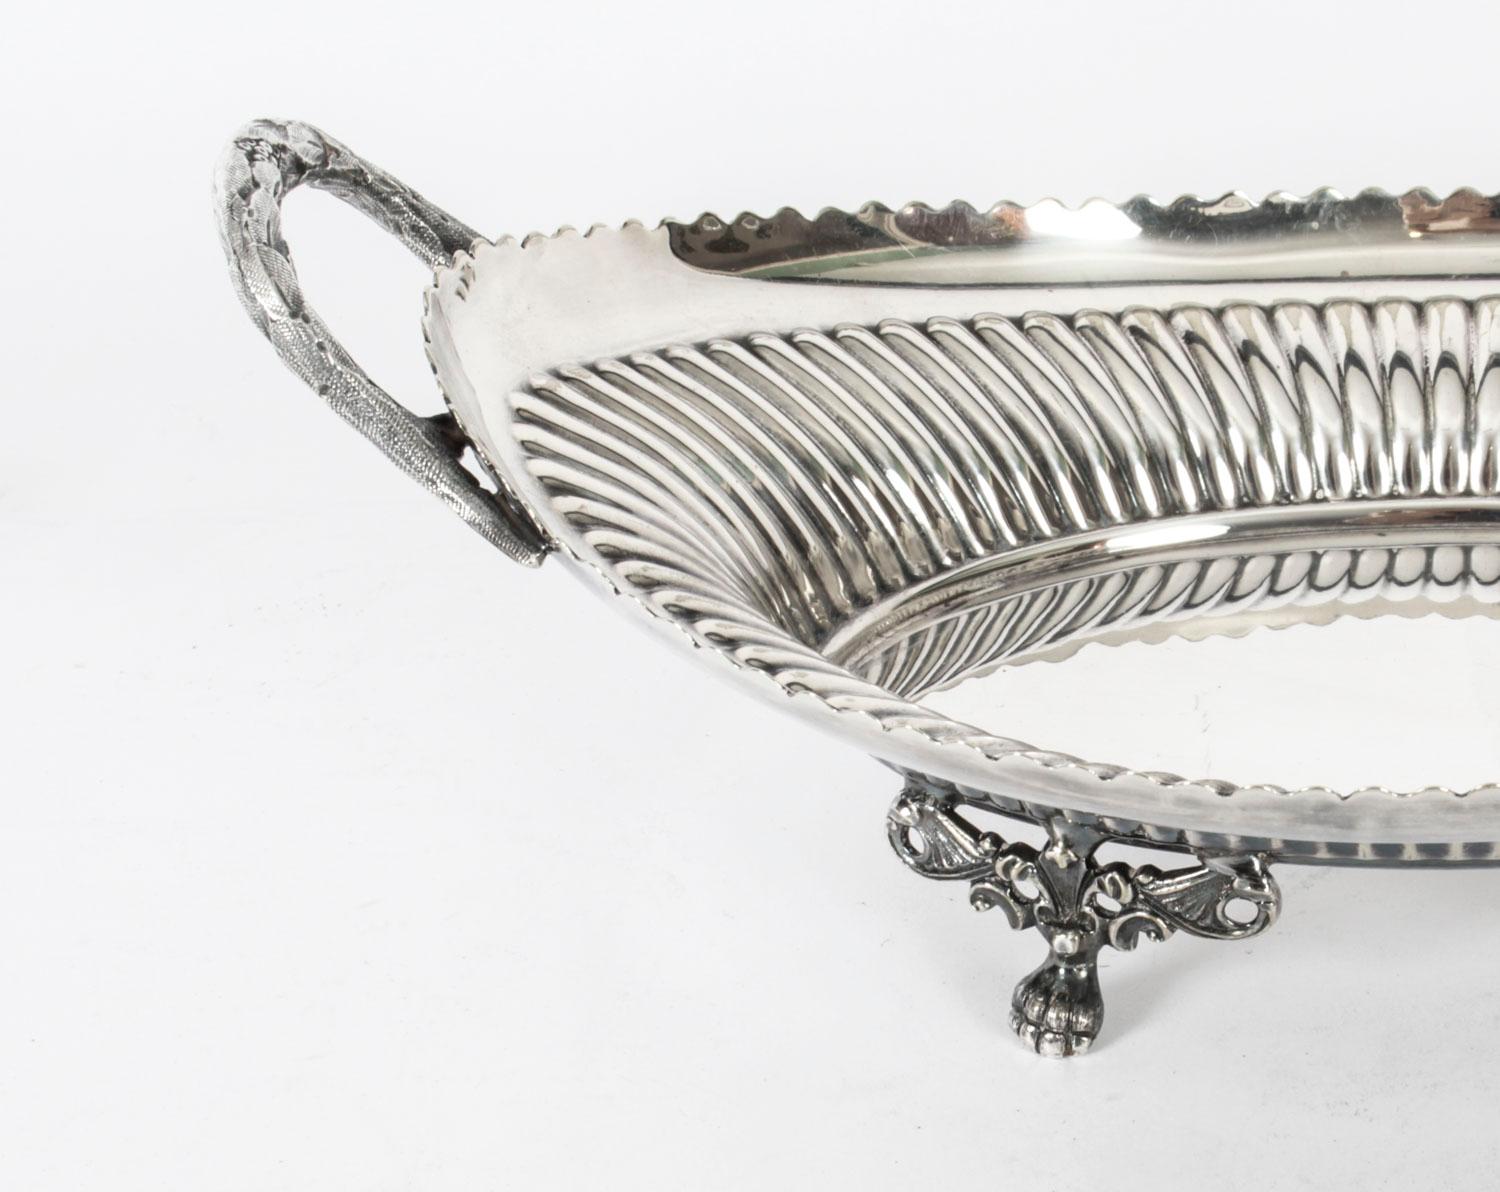 This is an exquisite antique English silver plated bread basket by the renowned silversmith and retailer of Sheffield & London, Walker & Hall.
 
Add an elegant touch to your next dining experience with this lovely basket.
 
Condition:
In